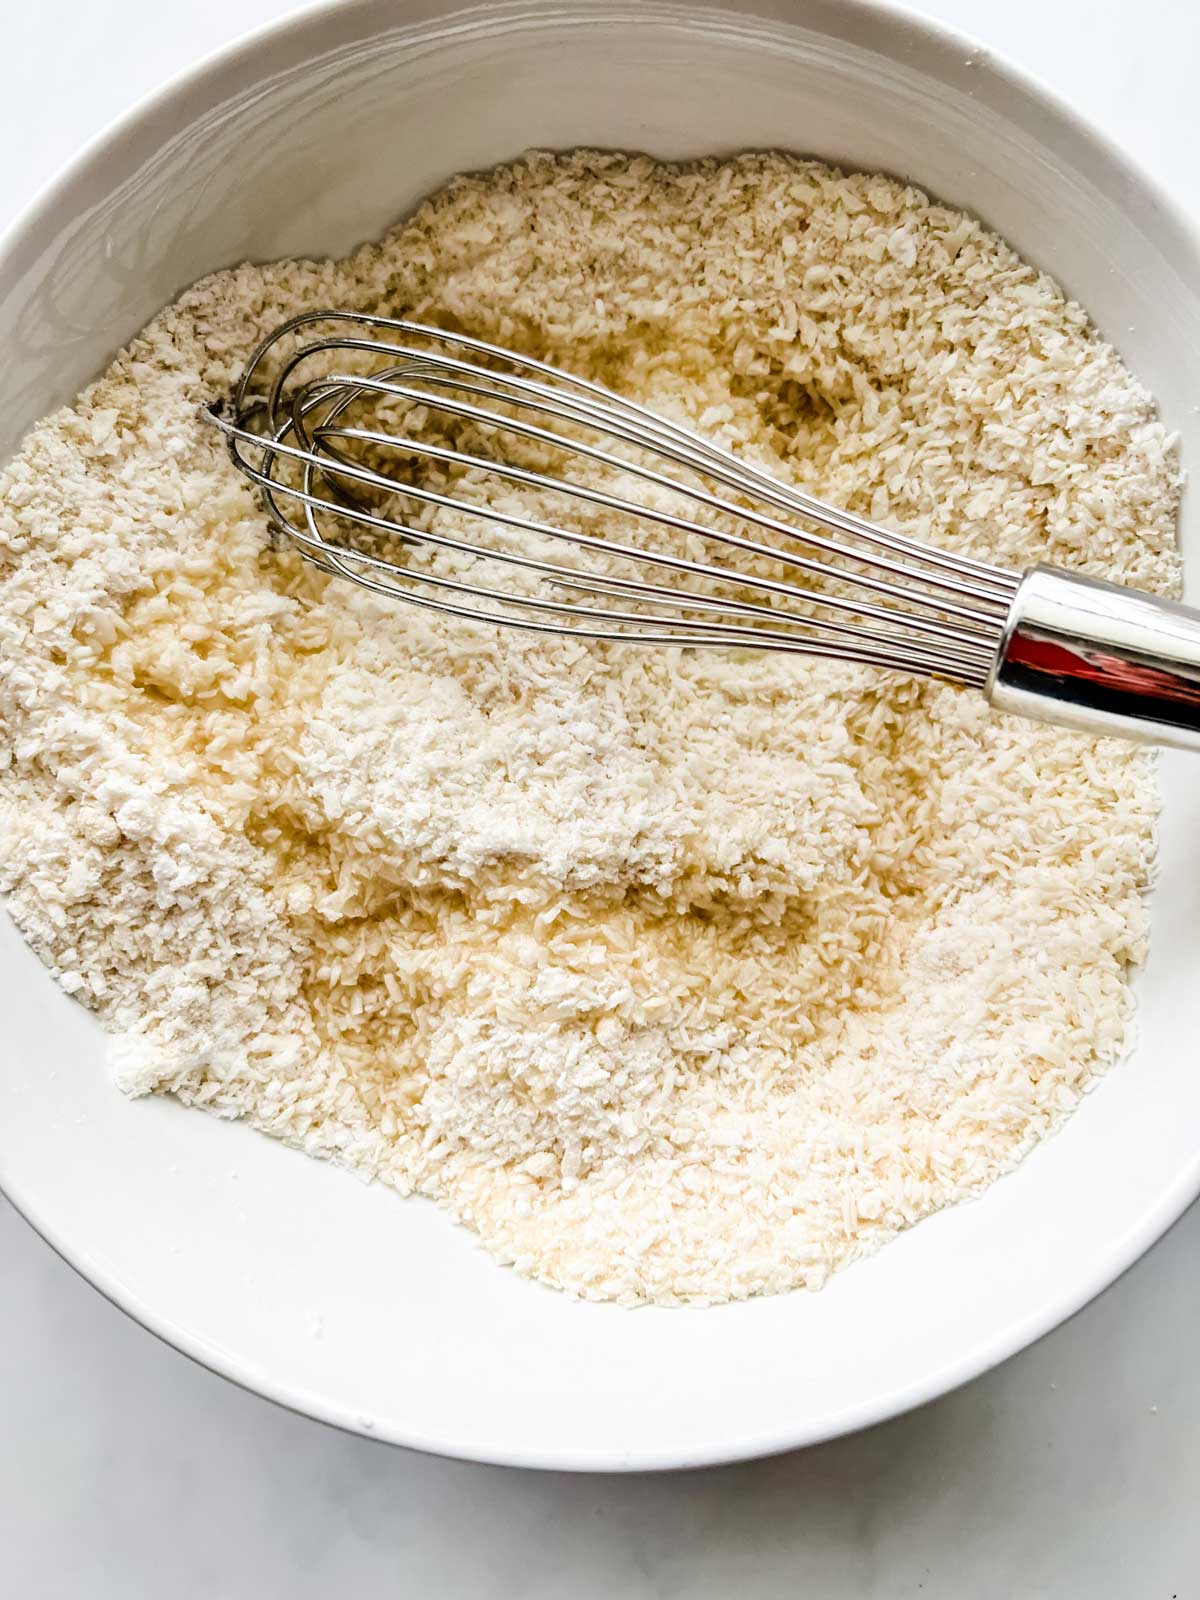 Photo of the dry ingredients for keto macaroons that have been drizzled with melted coconut oil.